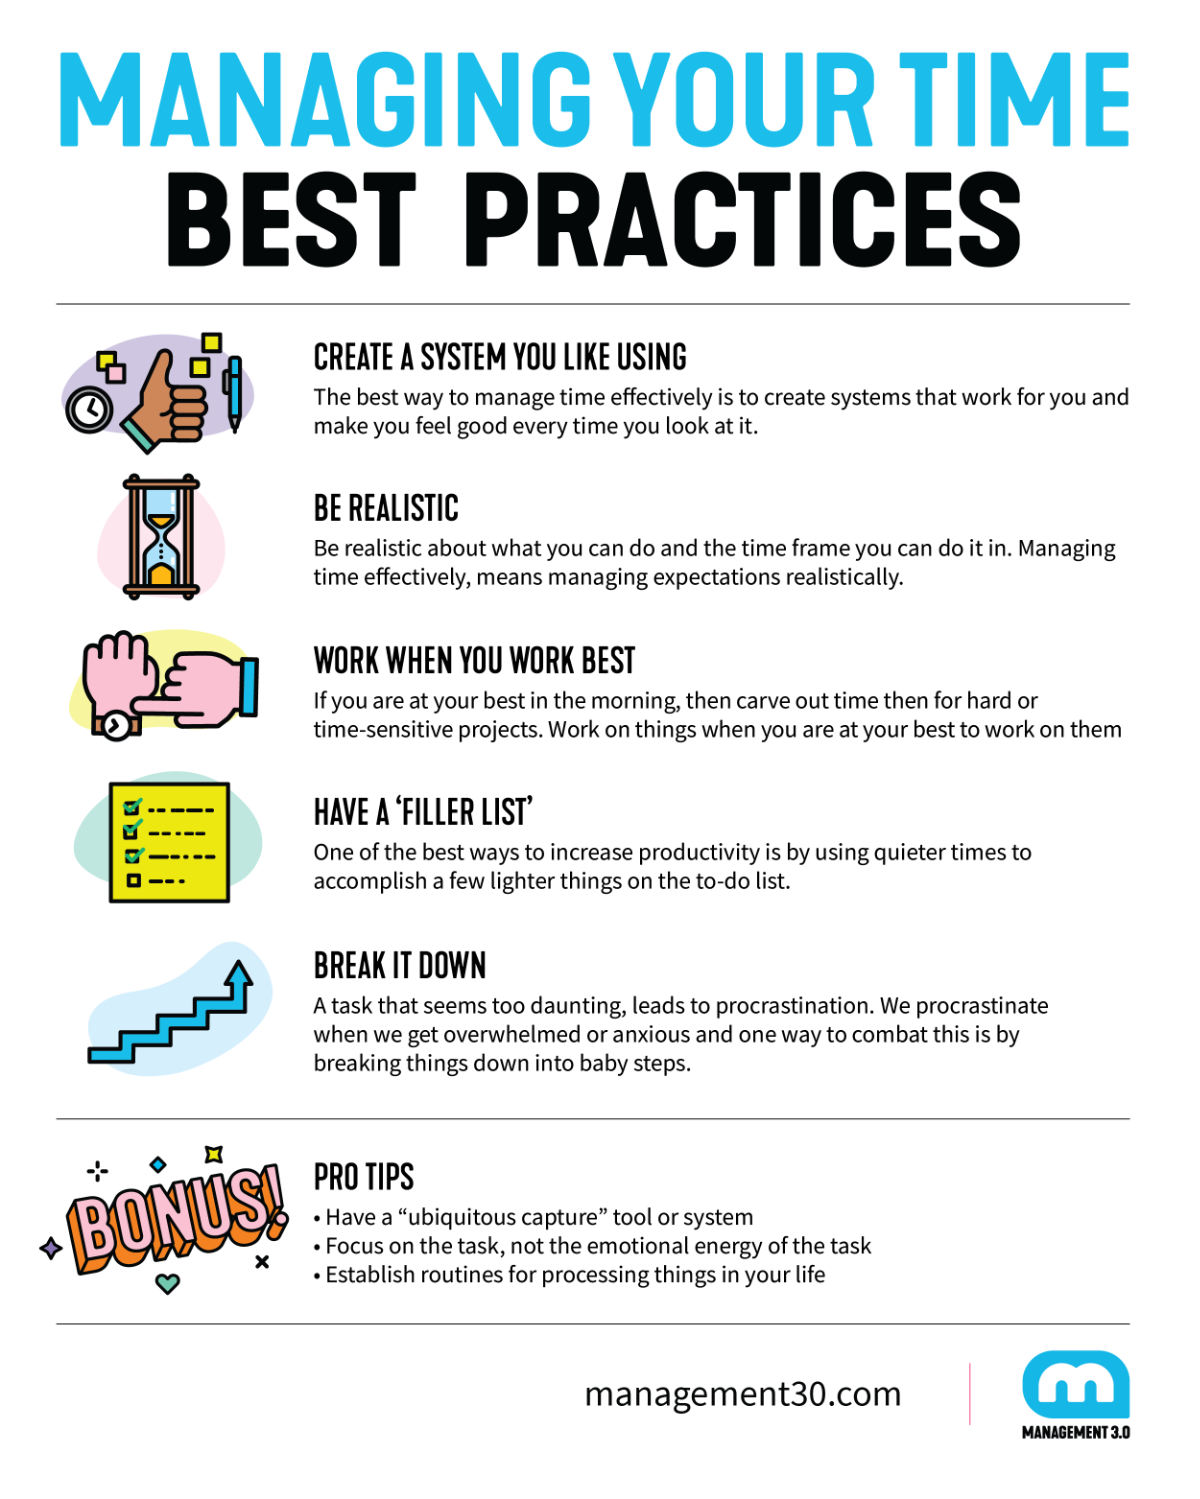 Managing your Time: Best Practices